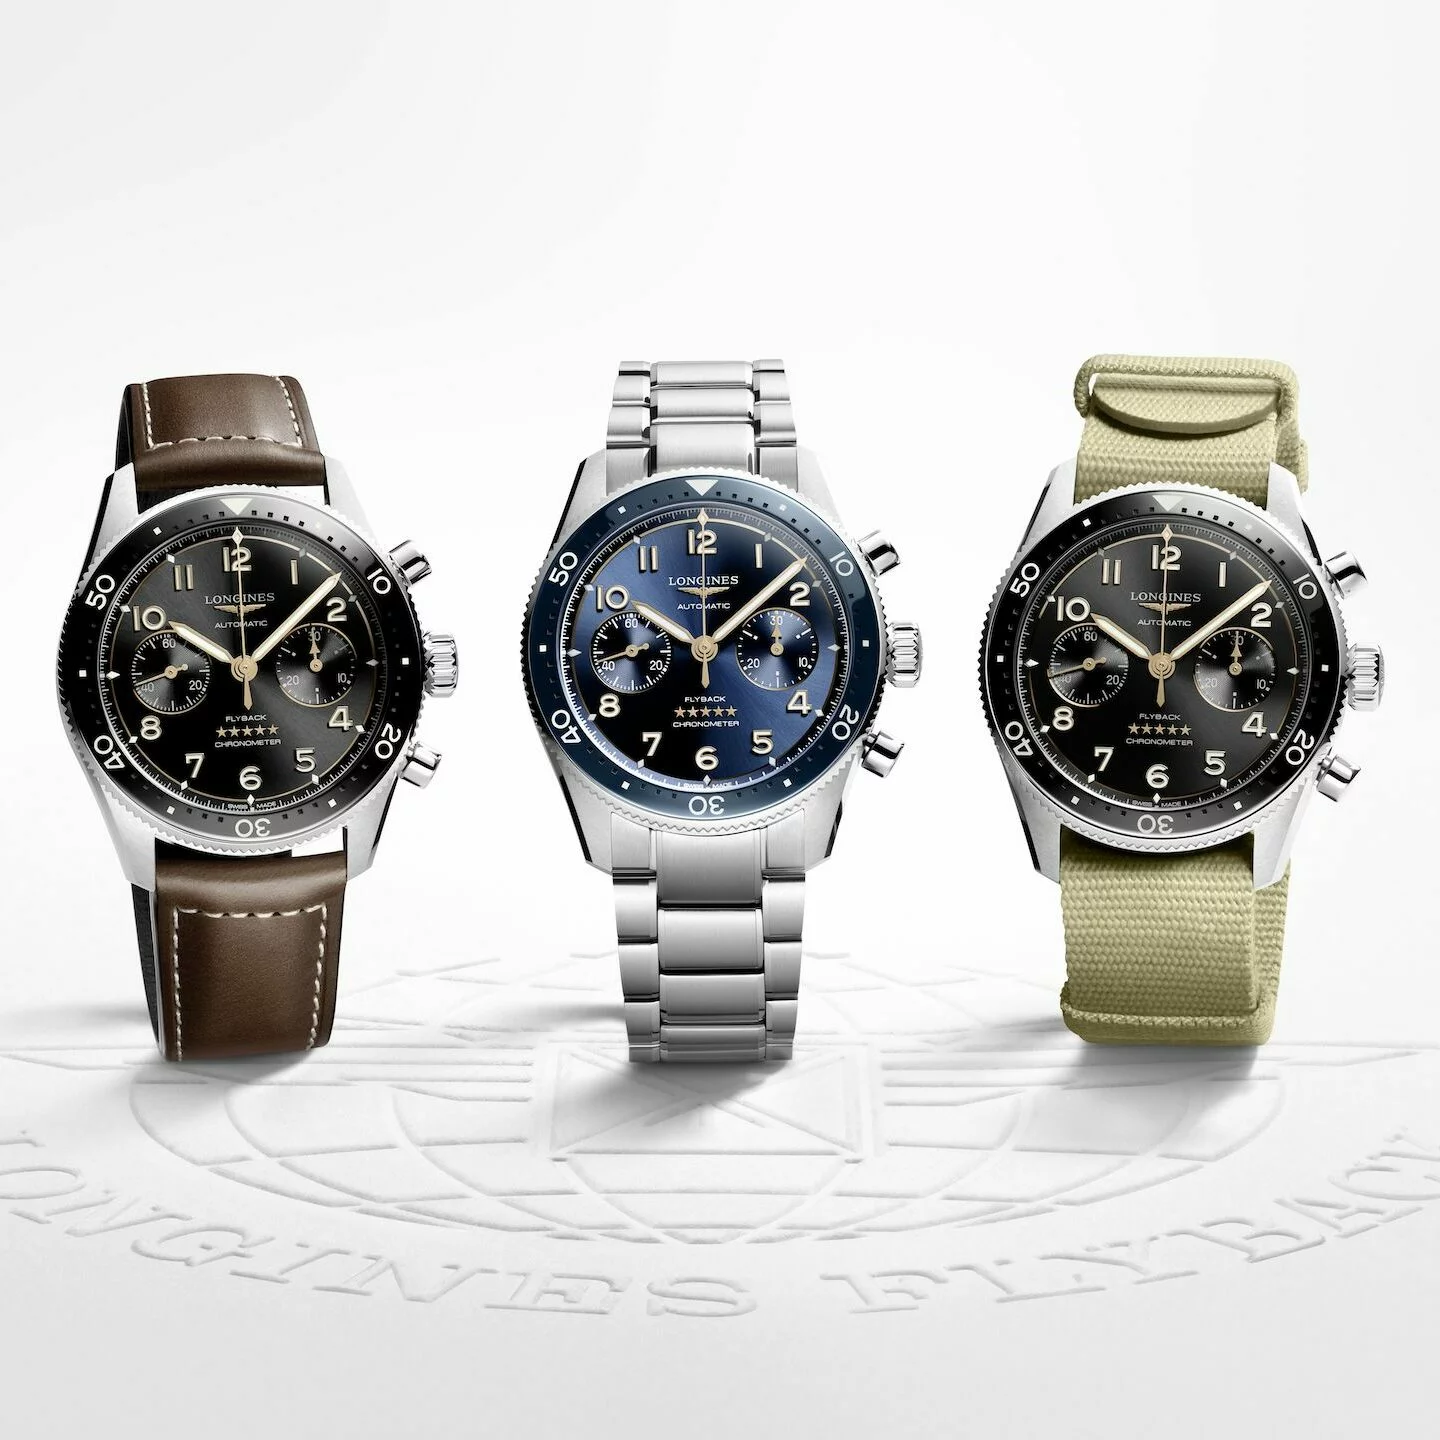 The New Longines Spirit Flyback Is The Latest Entry Into The Rock-solid ...